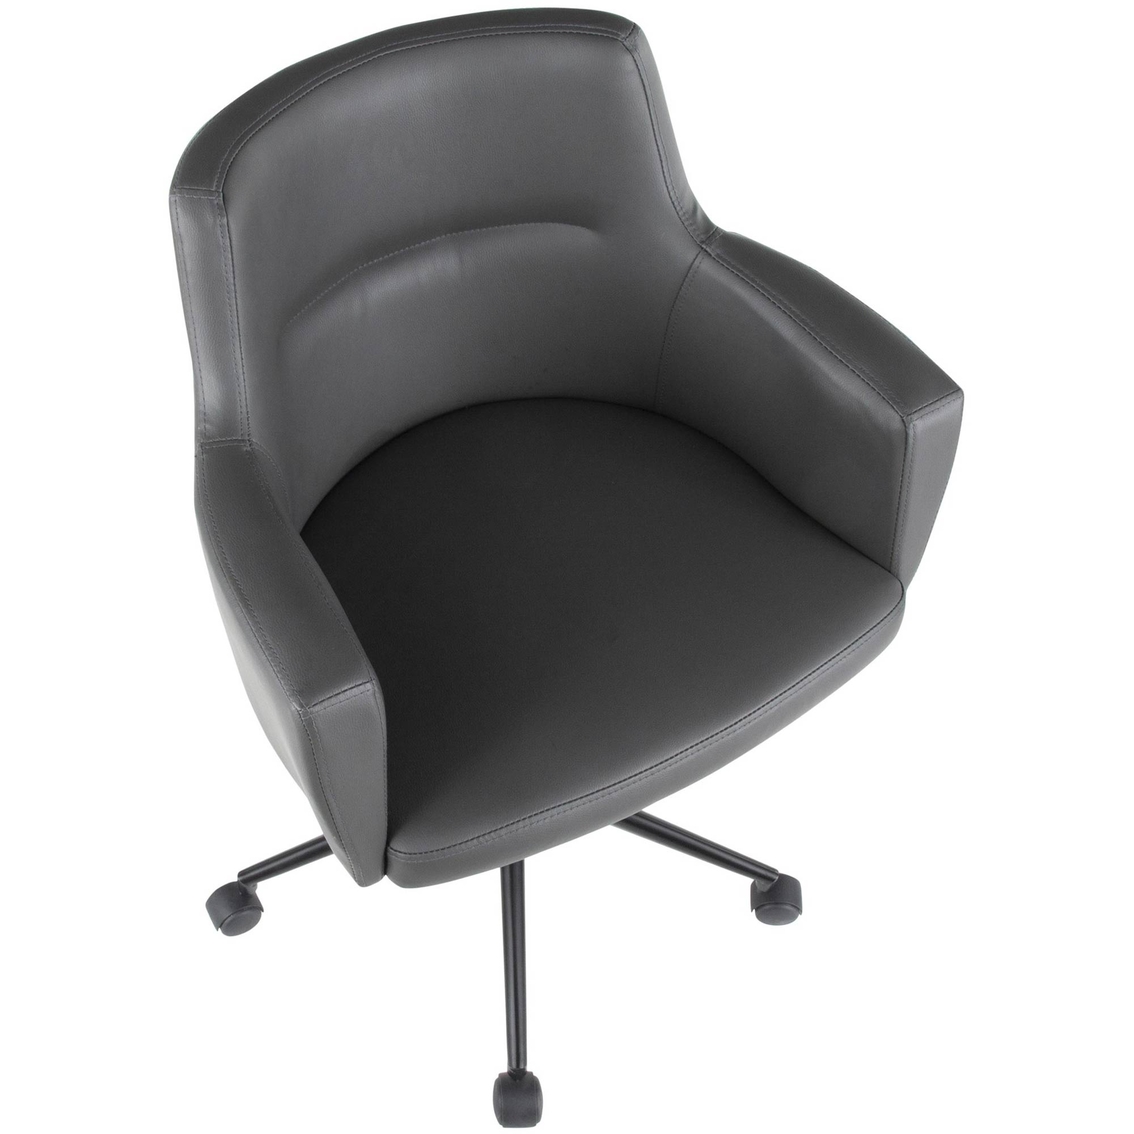 LumiSource Andrew Office Chair - Image 6 of 6